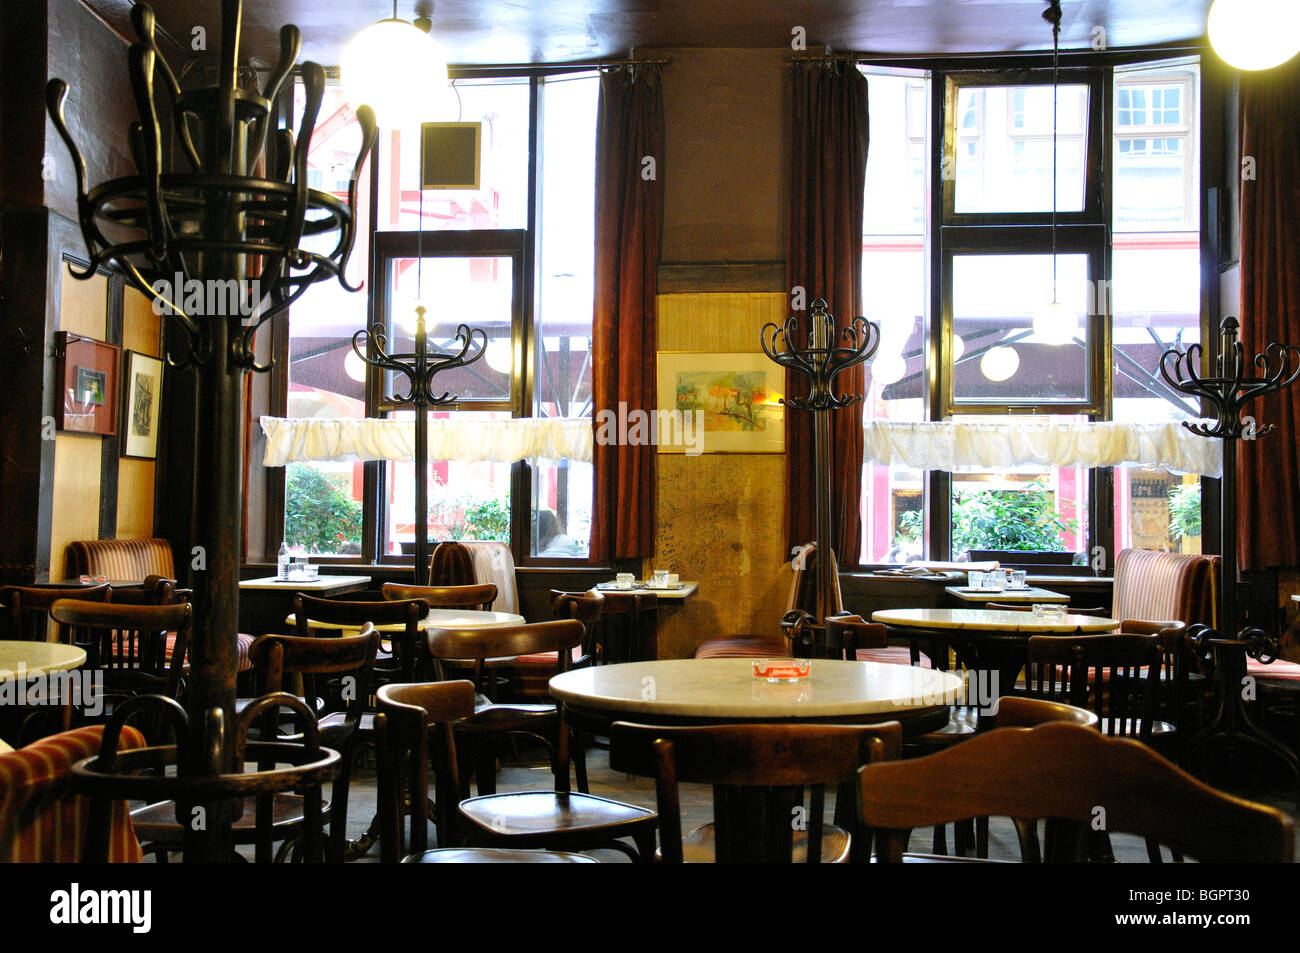 Cafe Hawelka, Vienna, Austria - one of the oldest cafes in Vienna Stock Photo